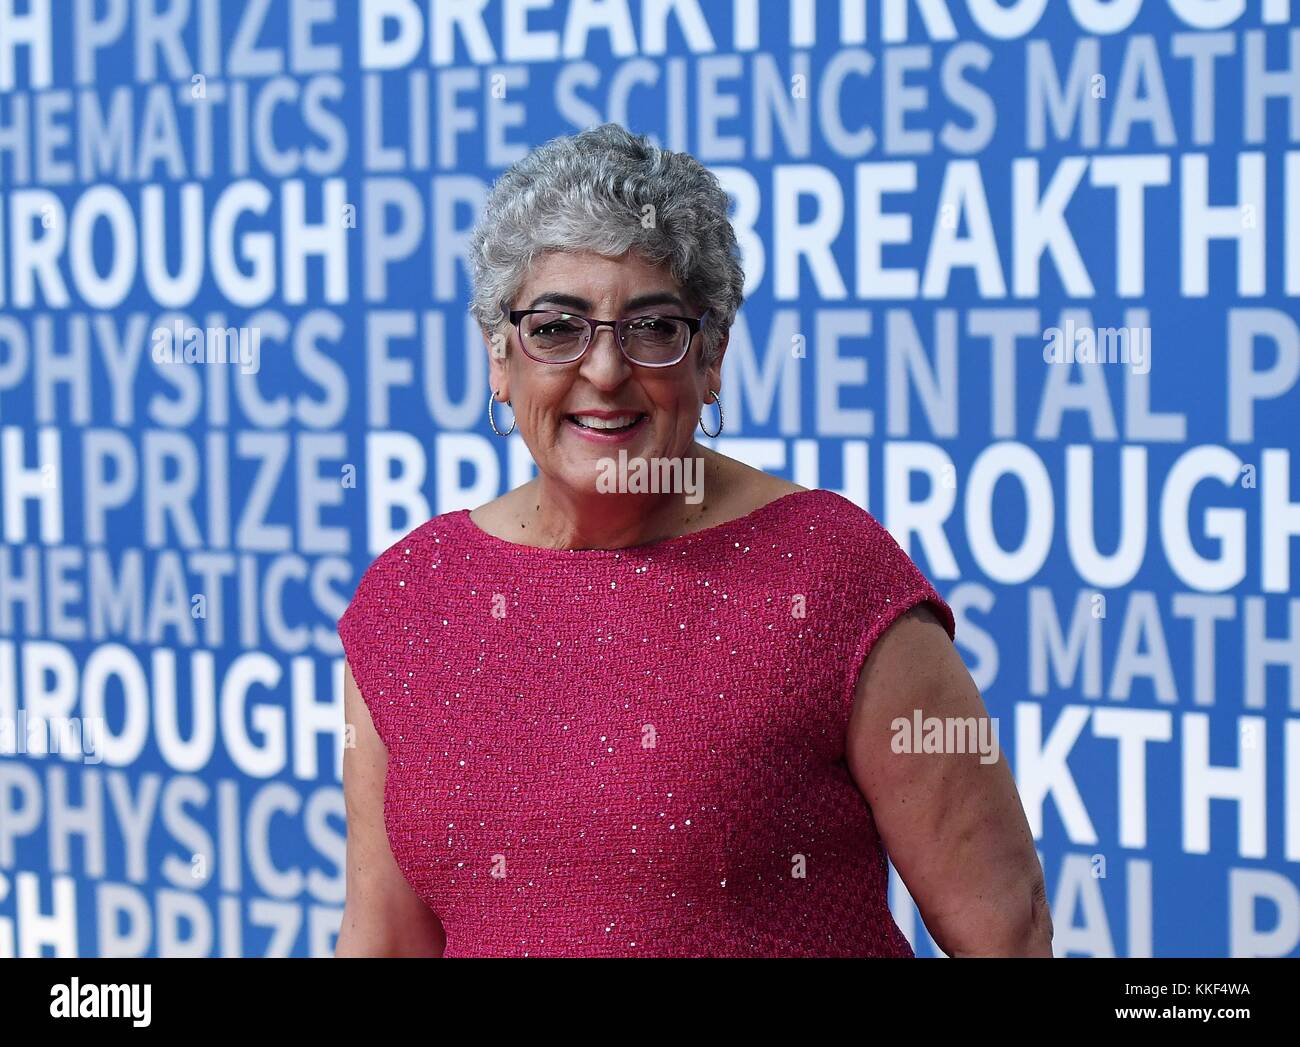 (171204) -- SAN FRANCISCO, Dec. 4, 2017 (Xinhua) -- Joanne Chory from the Salk Institute for Biological Studies and Howard Hughes Medical Institute attends the awarding ceremony of the 2018 Breakthrough Prize in San Francisco, the United States, on Dec. 3, 2017. The Breakthrough Prize Foundation on Sunday announced here the winners of the 2018 Breakthrough Prizes in fundamental physics, life sciences and mathematics, together with several other prizes to encourage young scientists. The prize in life sciences went to Joanne Chory from the Salk Institute for Biological Studies and Howard Hughes Stock Photo